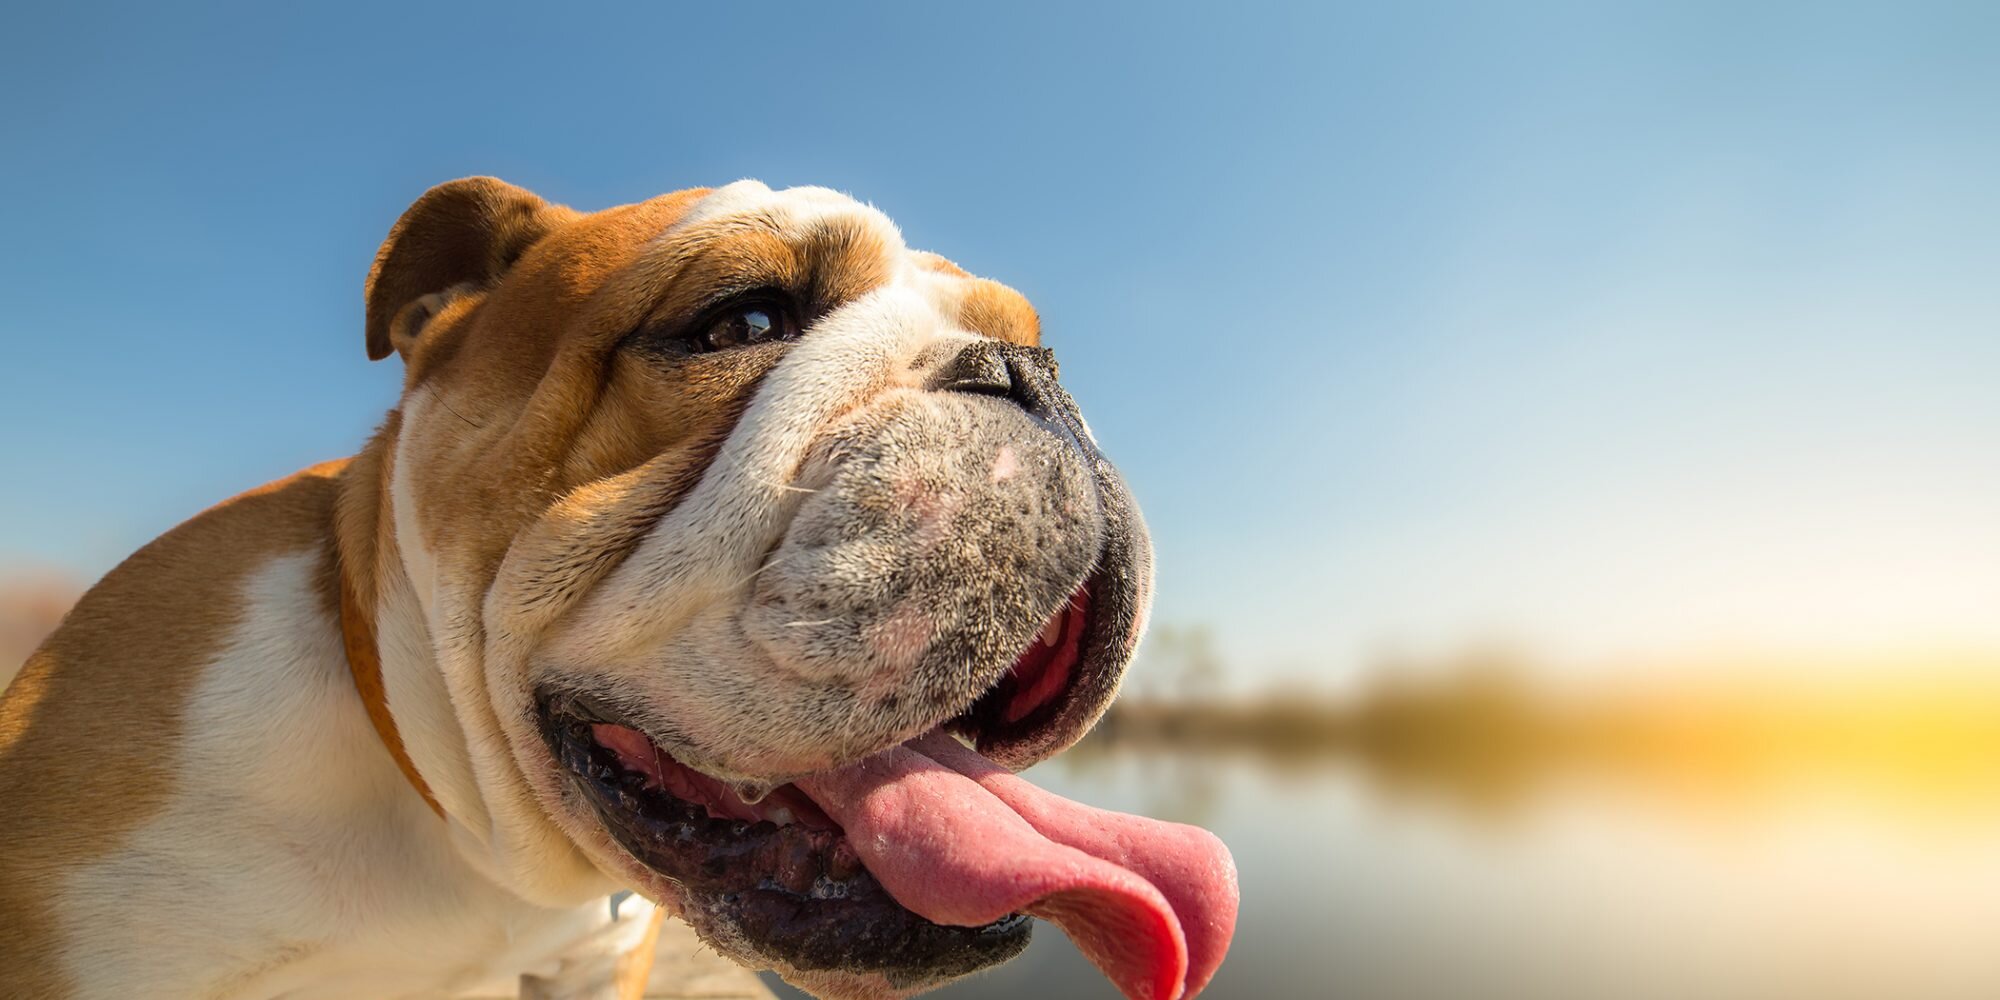 Do dogs sweat when hot?